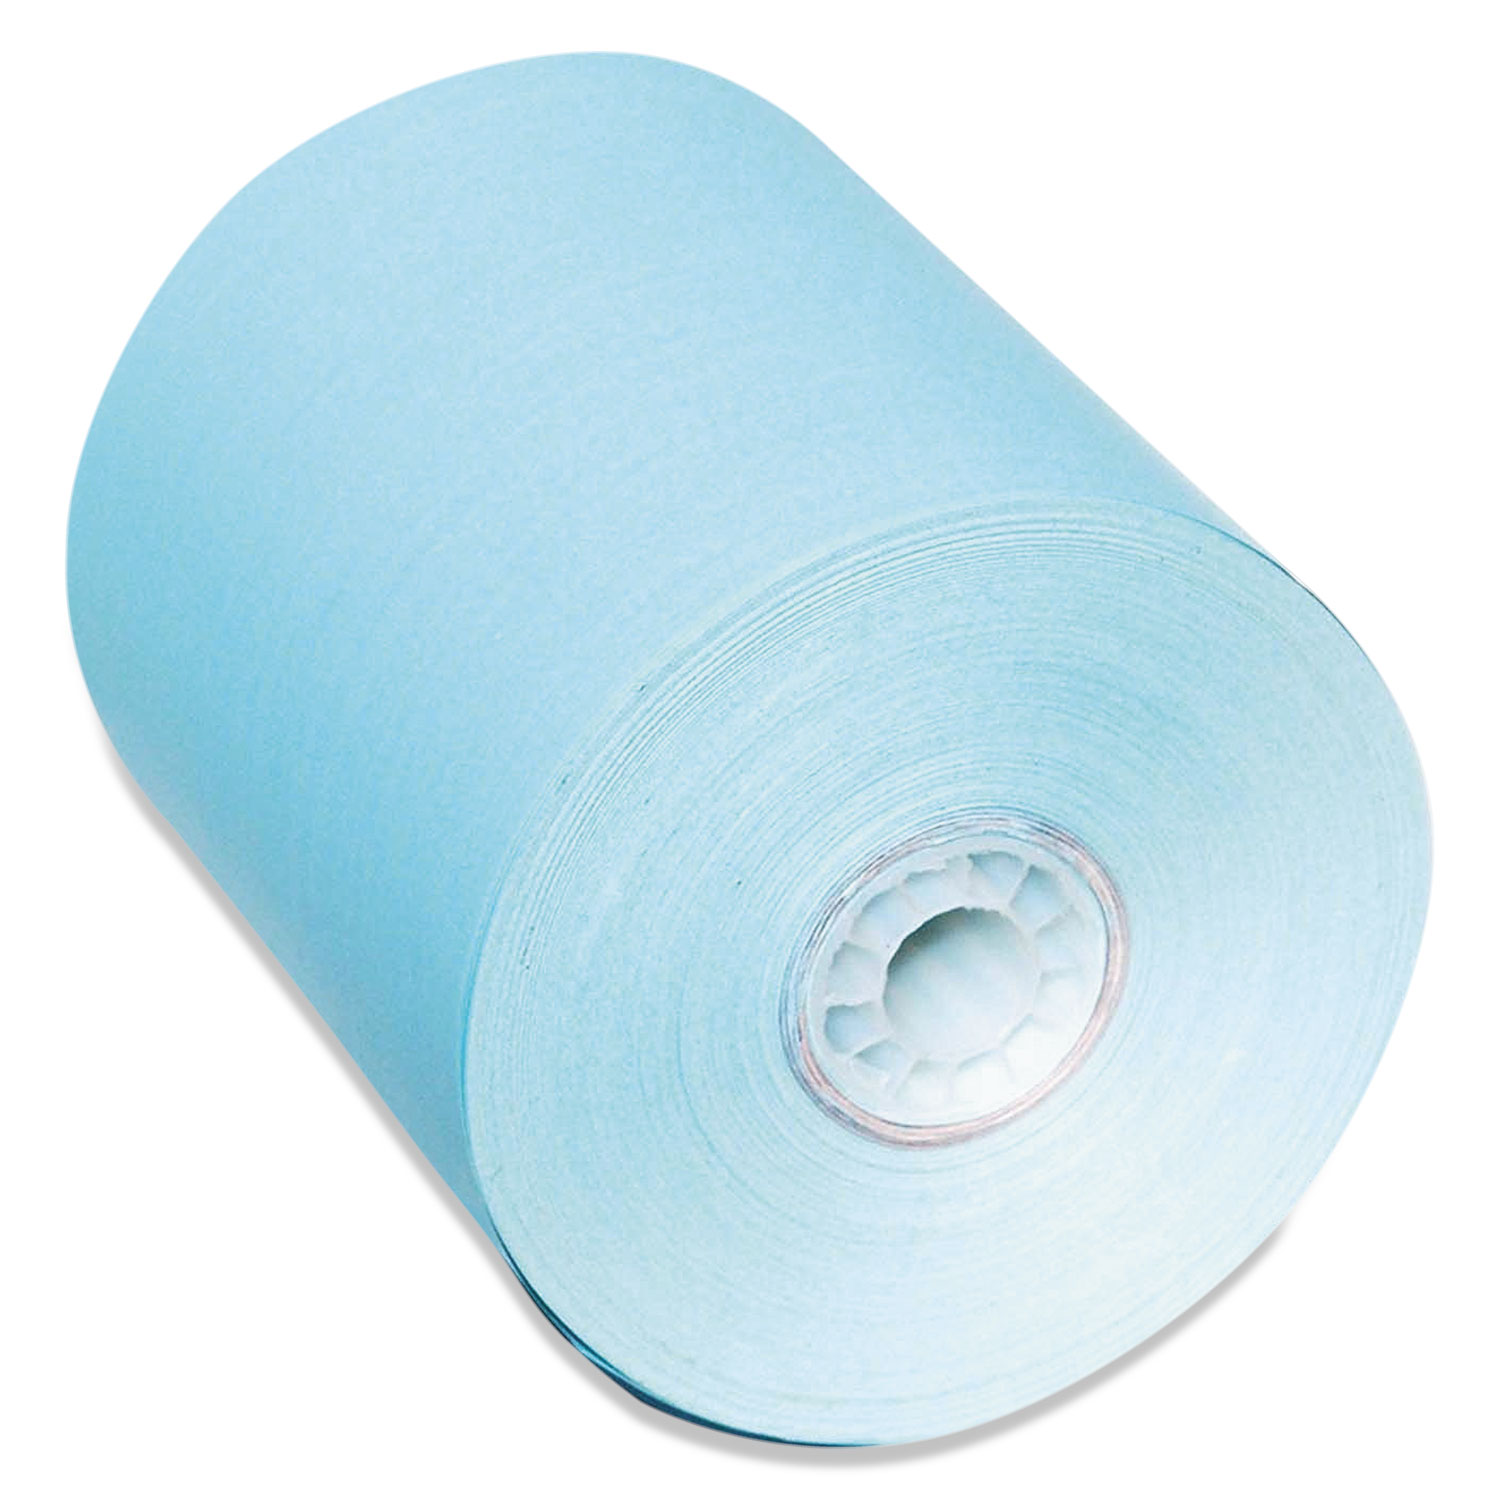  Iconex PMC05214B Direct Thermal Printing Paper Rolls, 0.45 Core, 3.13 x 230 ft, Blue, 50/Carton (ICX90902270) 